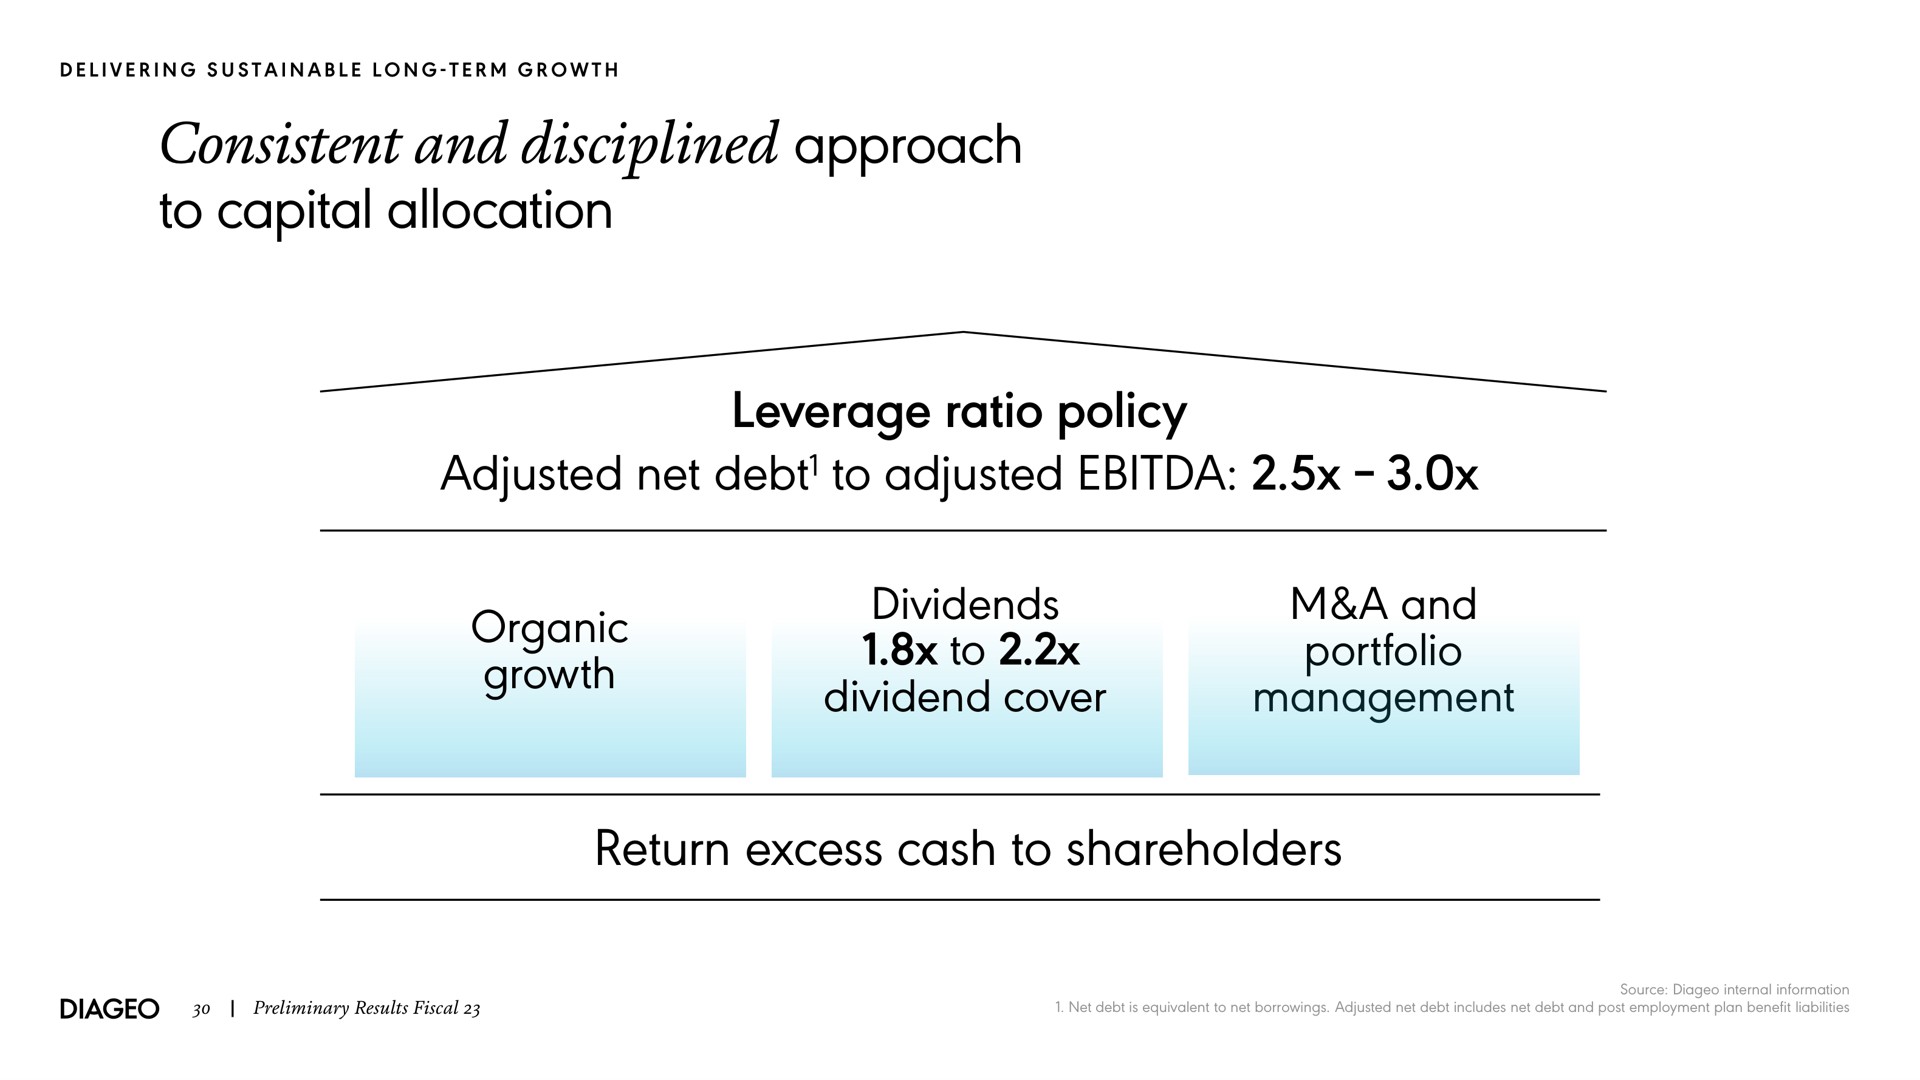 consistent and disciplined approach to capital allocation leverage ratio policy adjusted net debt to adjusted organic growth dividends to dividend cover a and portfolio management return excess cash to shareholders debt | Diageo